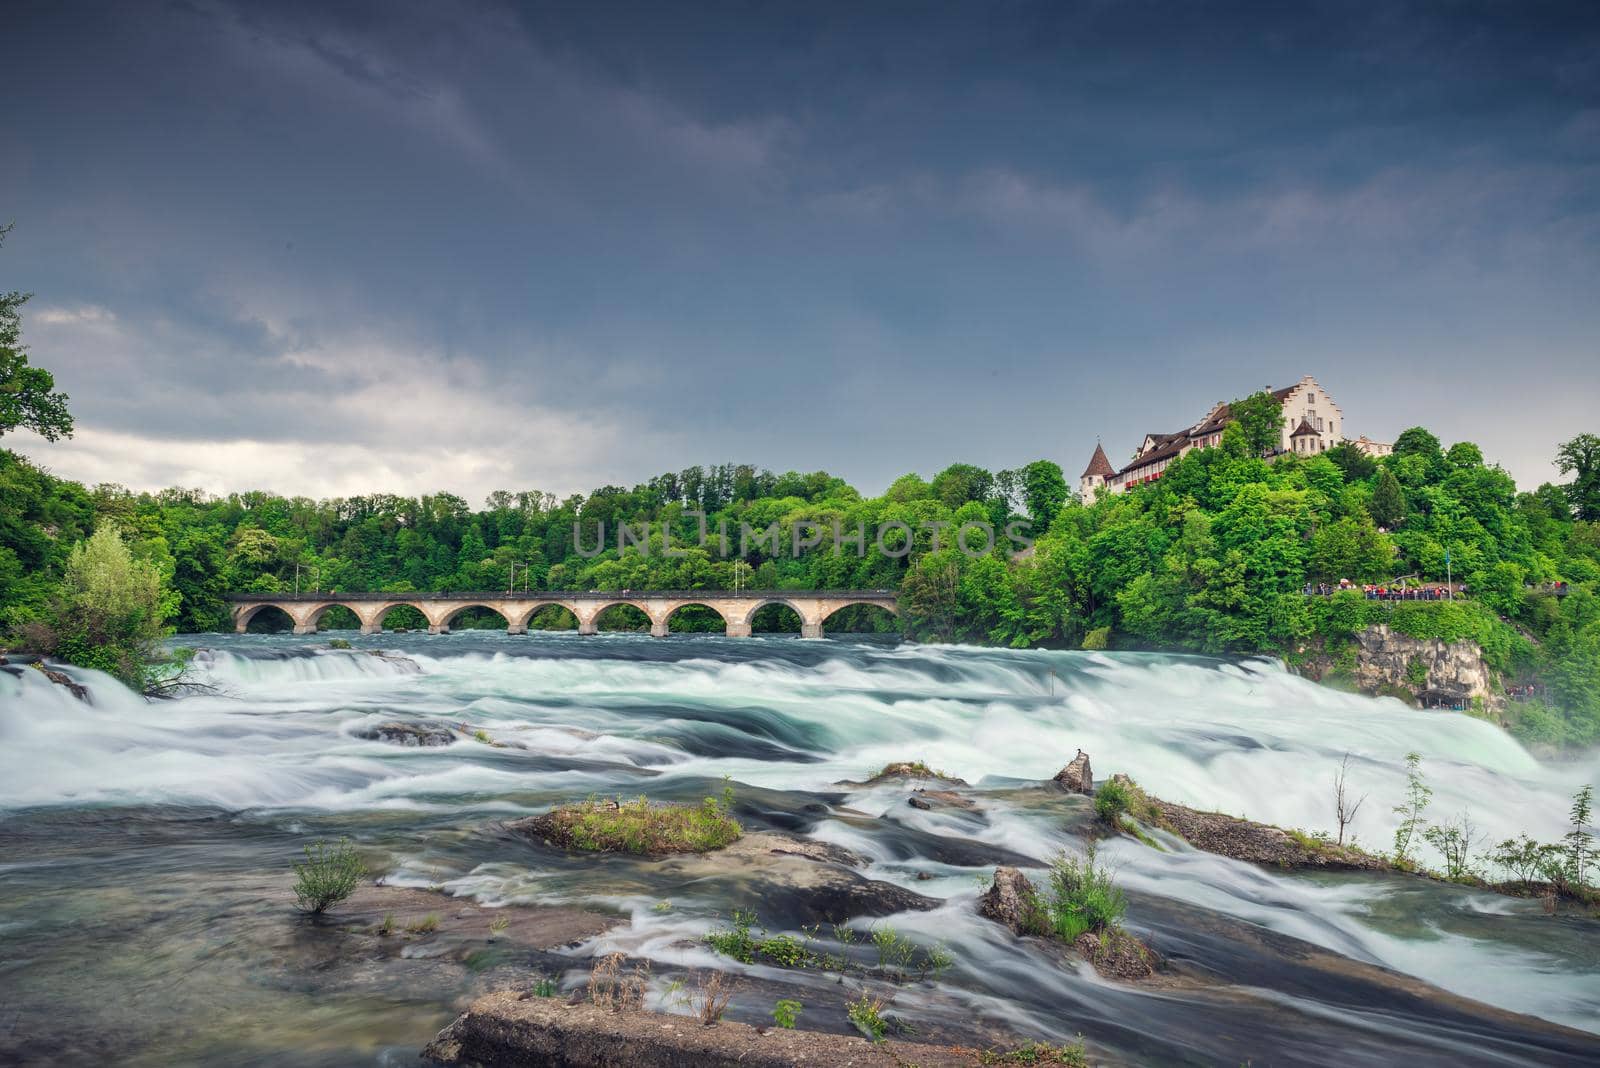 Natural Scenery of Rhine Falls and Swiss Church Culture at Schaffhausen City, Switzerland. Beautiful Nature Waterfront View of Rhine River With Architecture Historical Church Building in Summer.  by MahaHeang245789